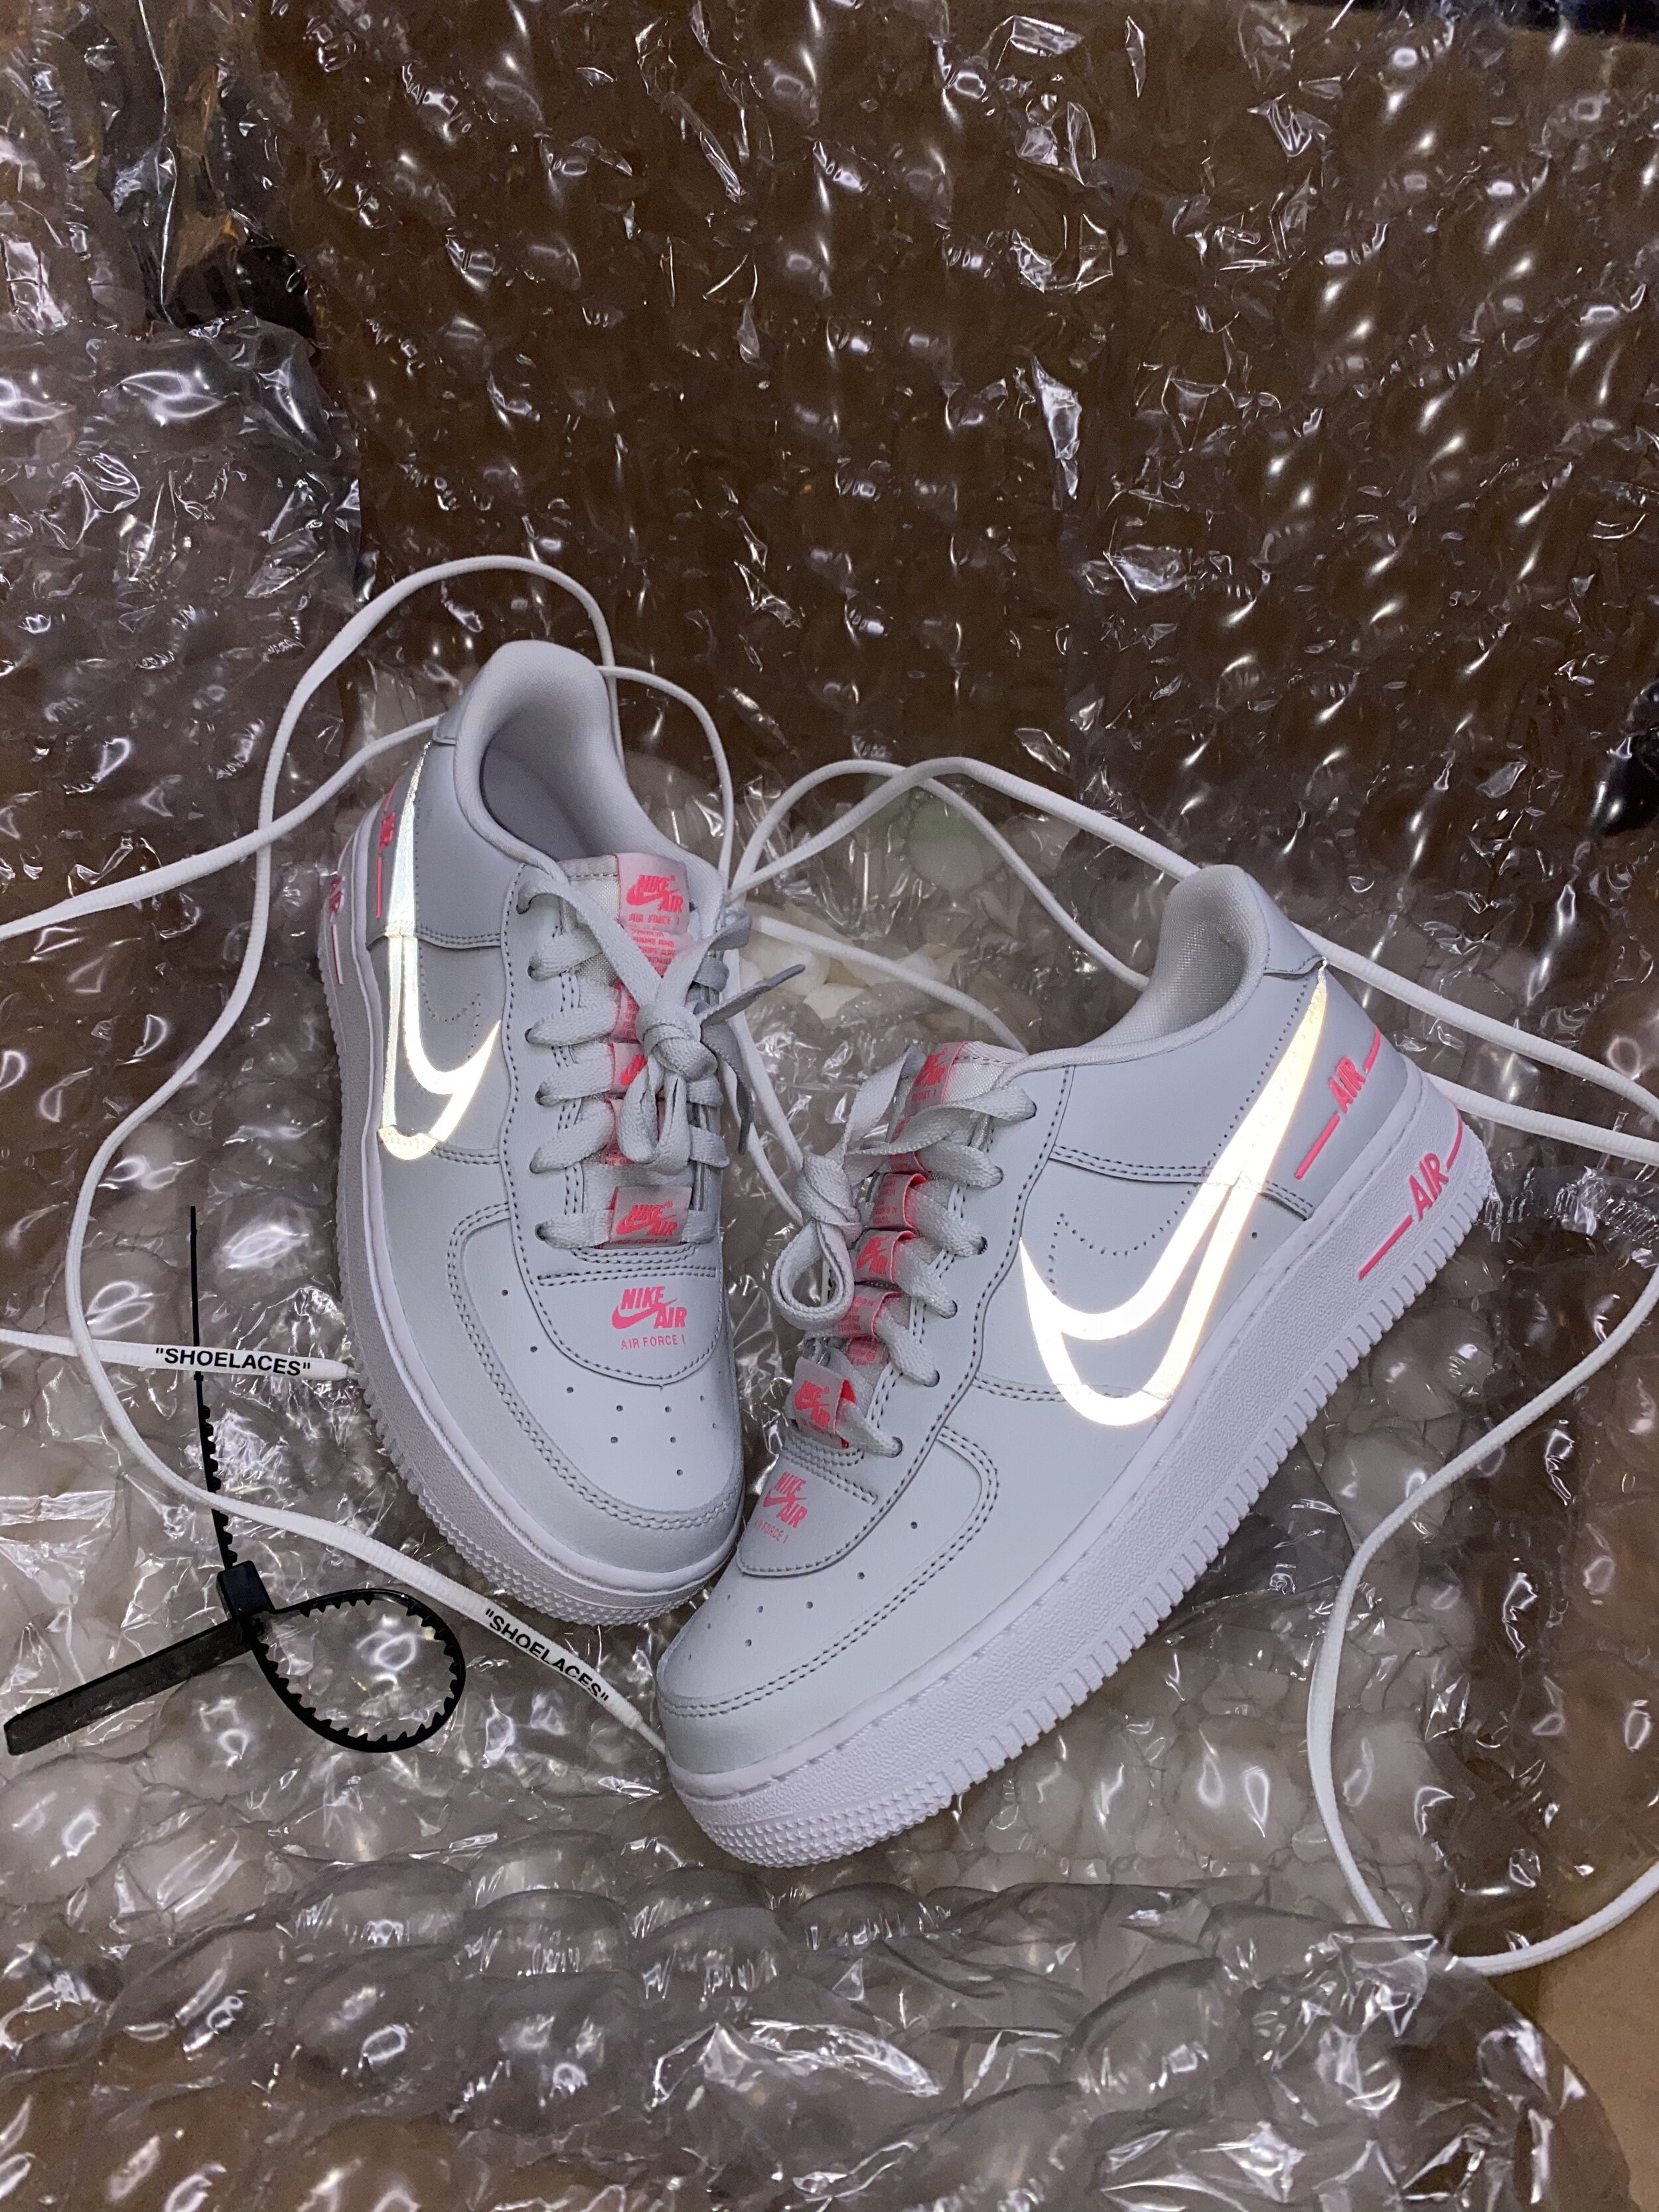 grey and pink air force 1